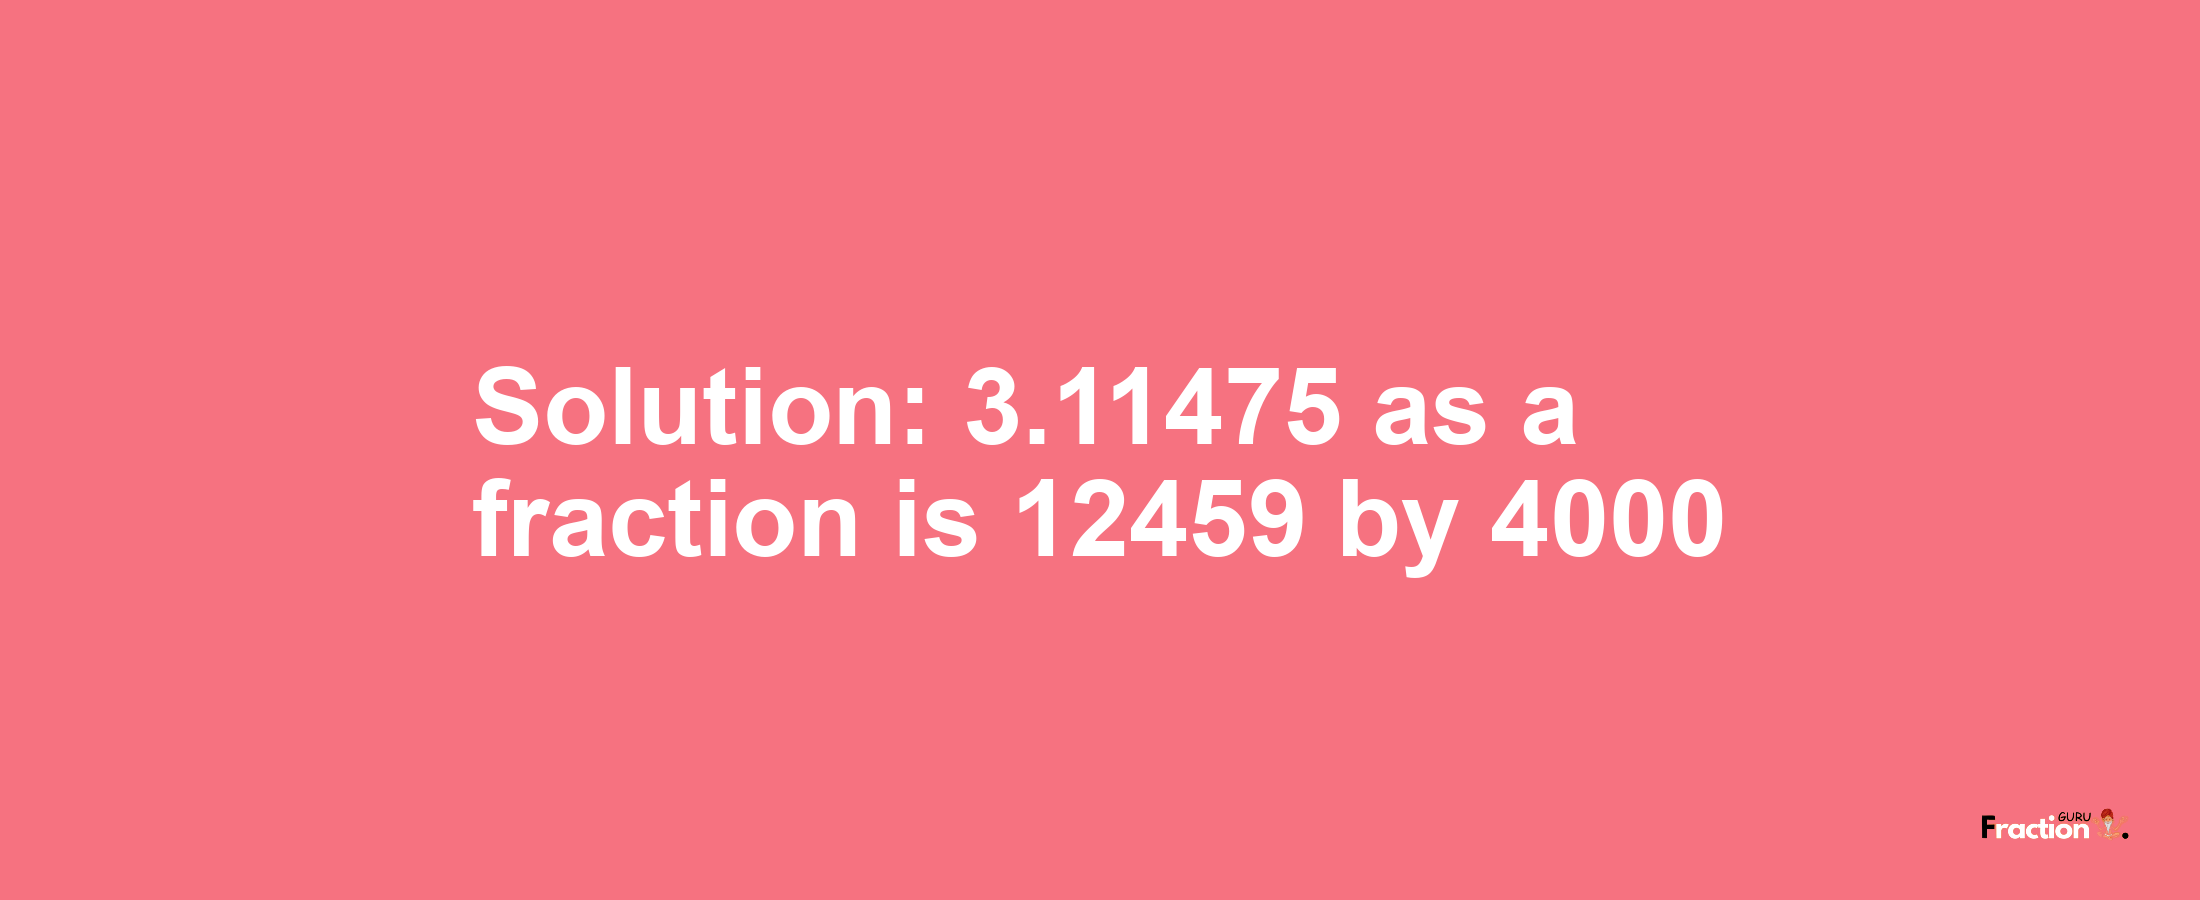 Solution:3.11475 as a fraction is 12459/4000